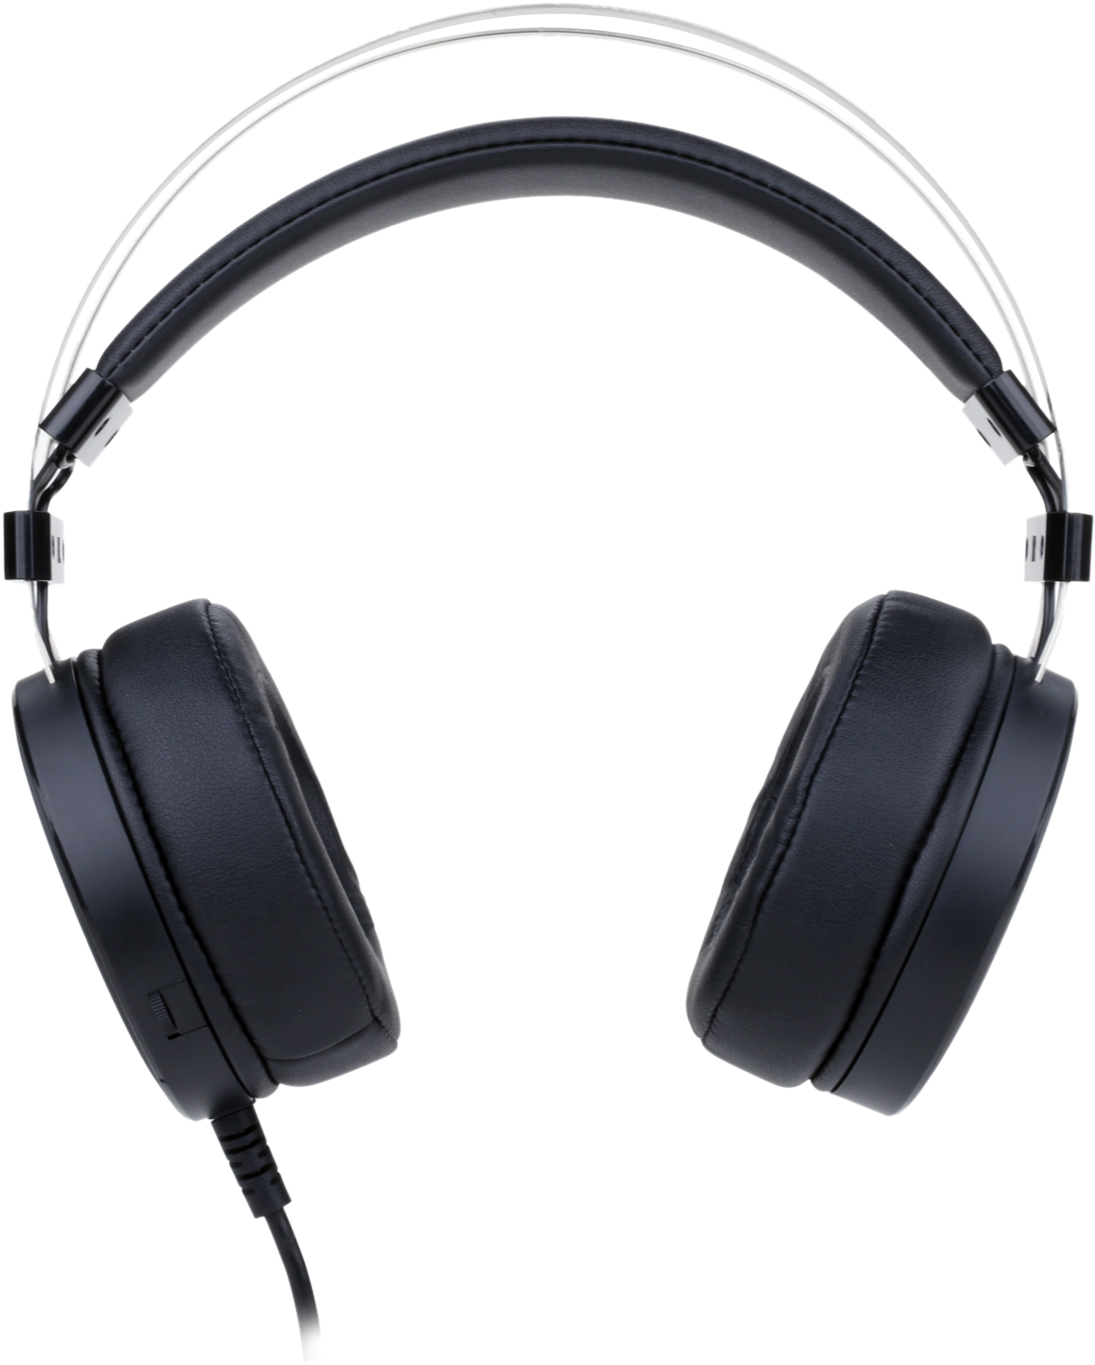 Black Gaming Headset Isolated PNG